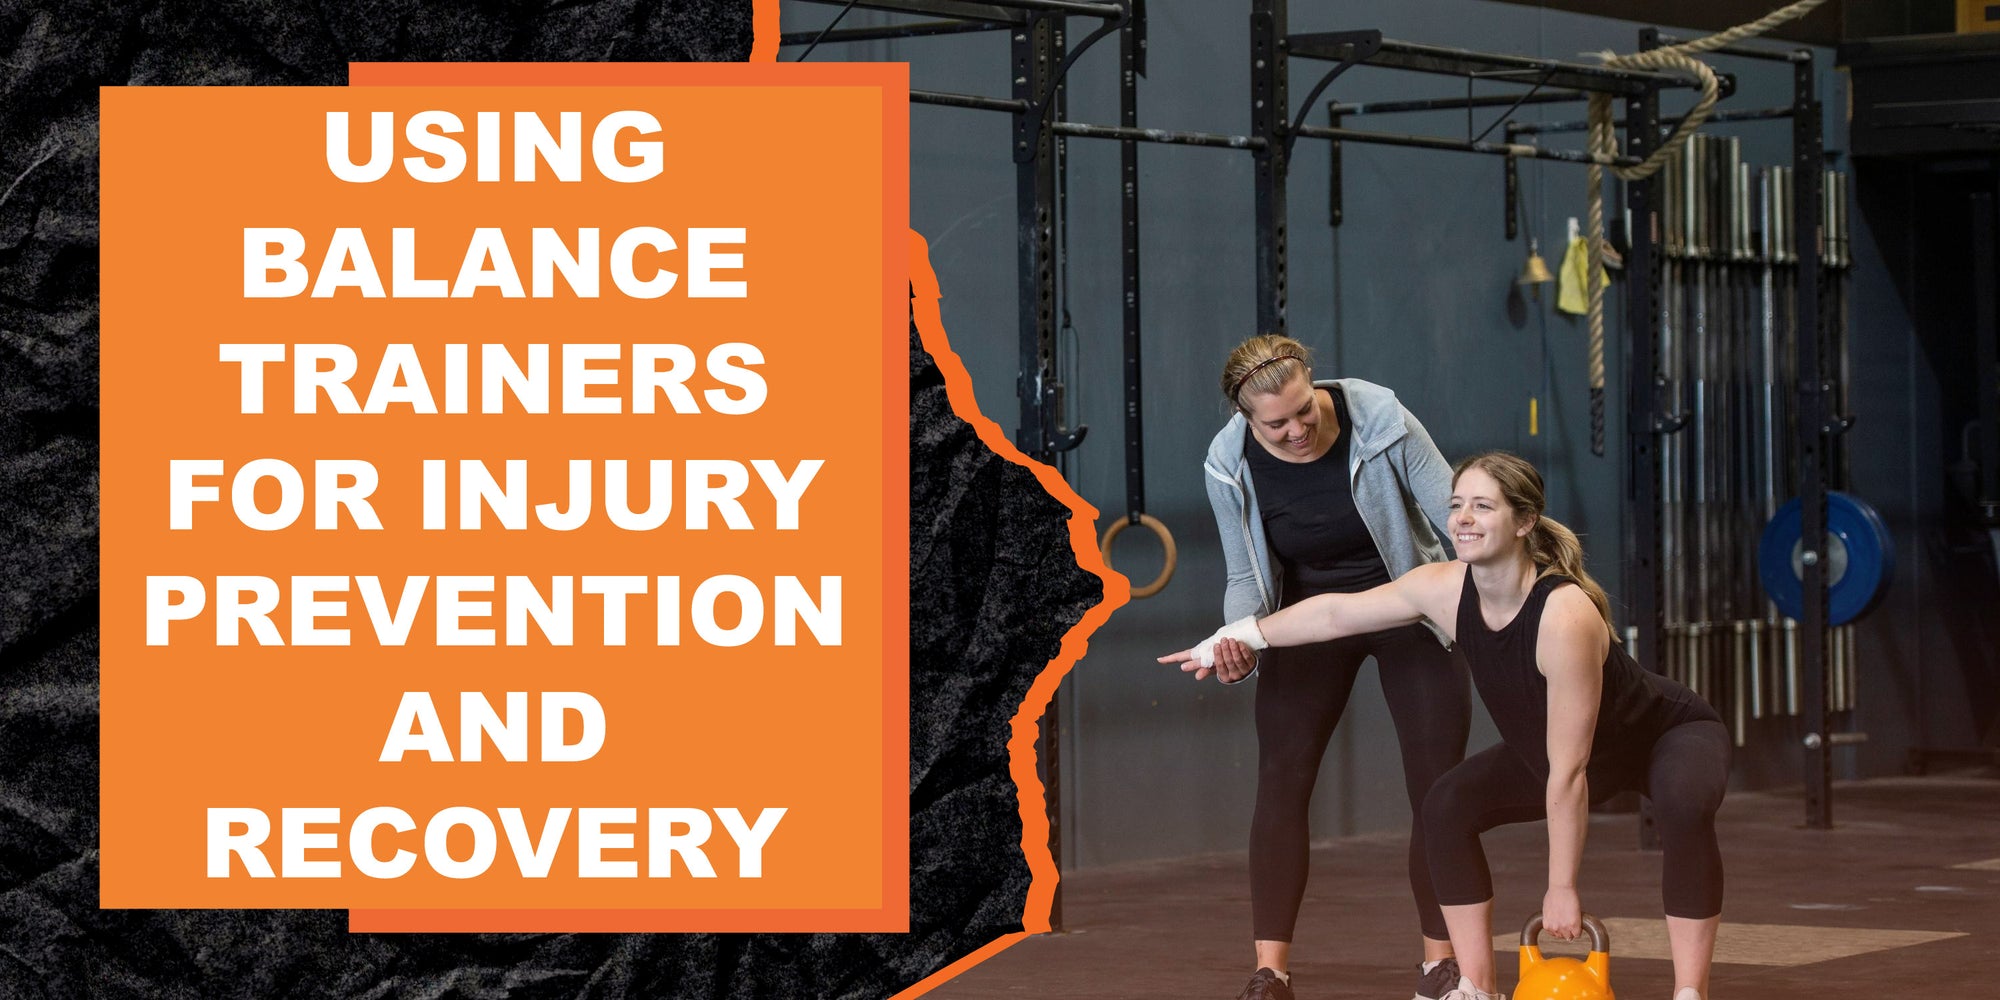 Using Balance Trainers for Injury Prevention and Recovery